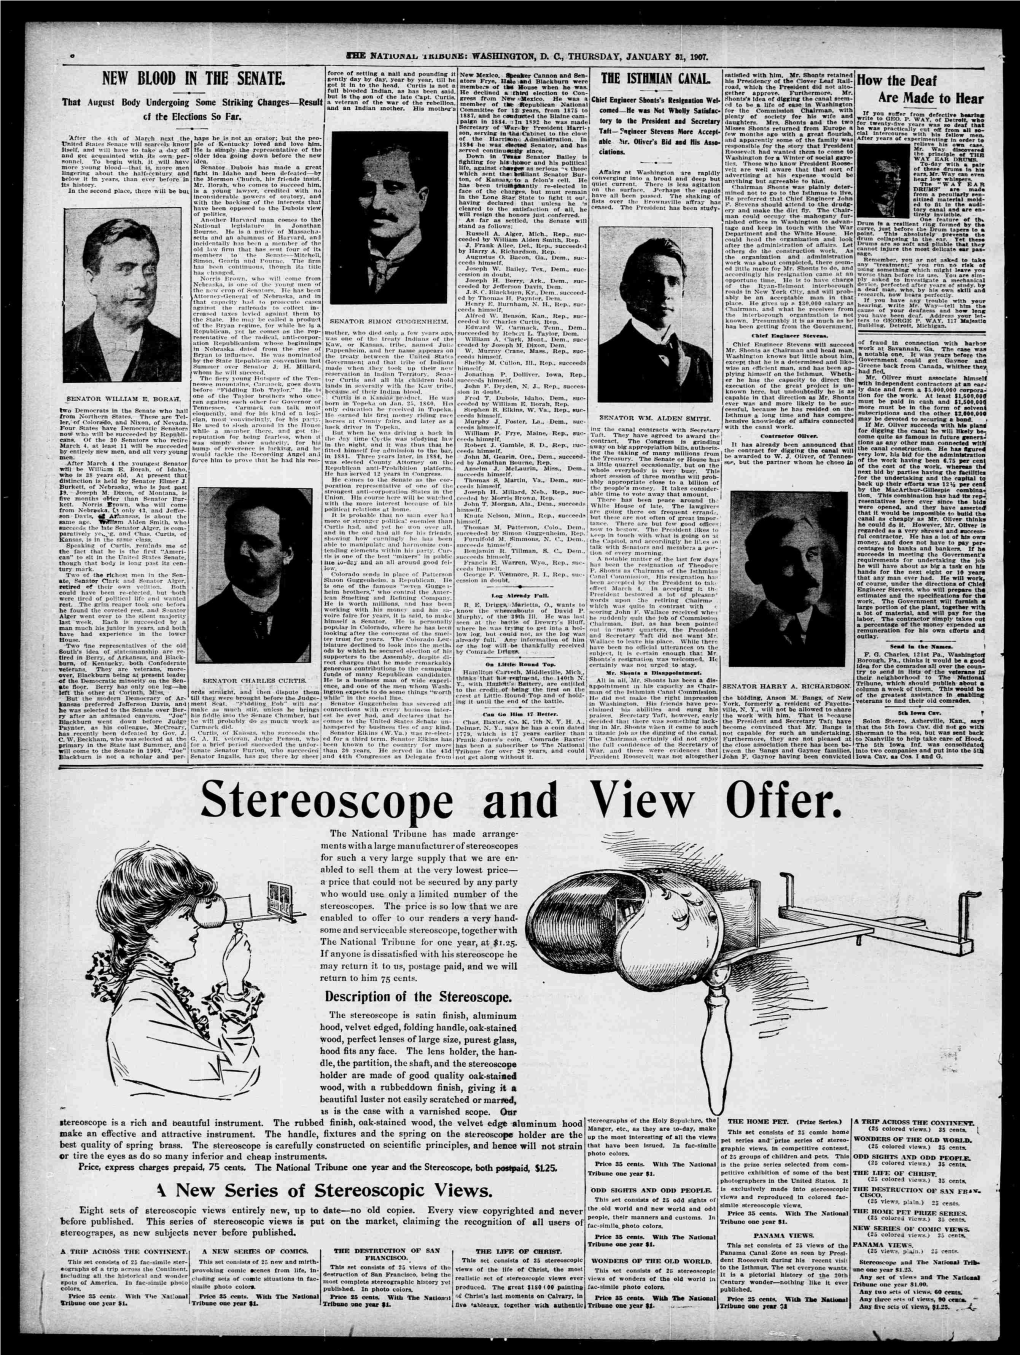 Stereoscope and View Offer